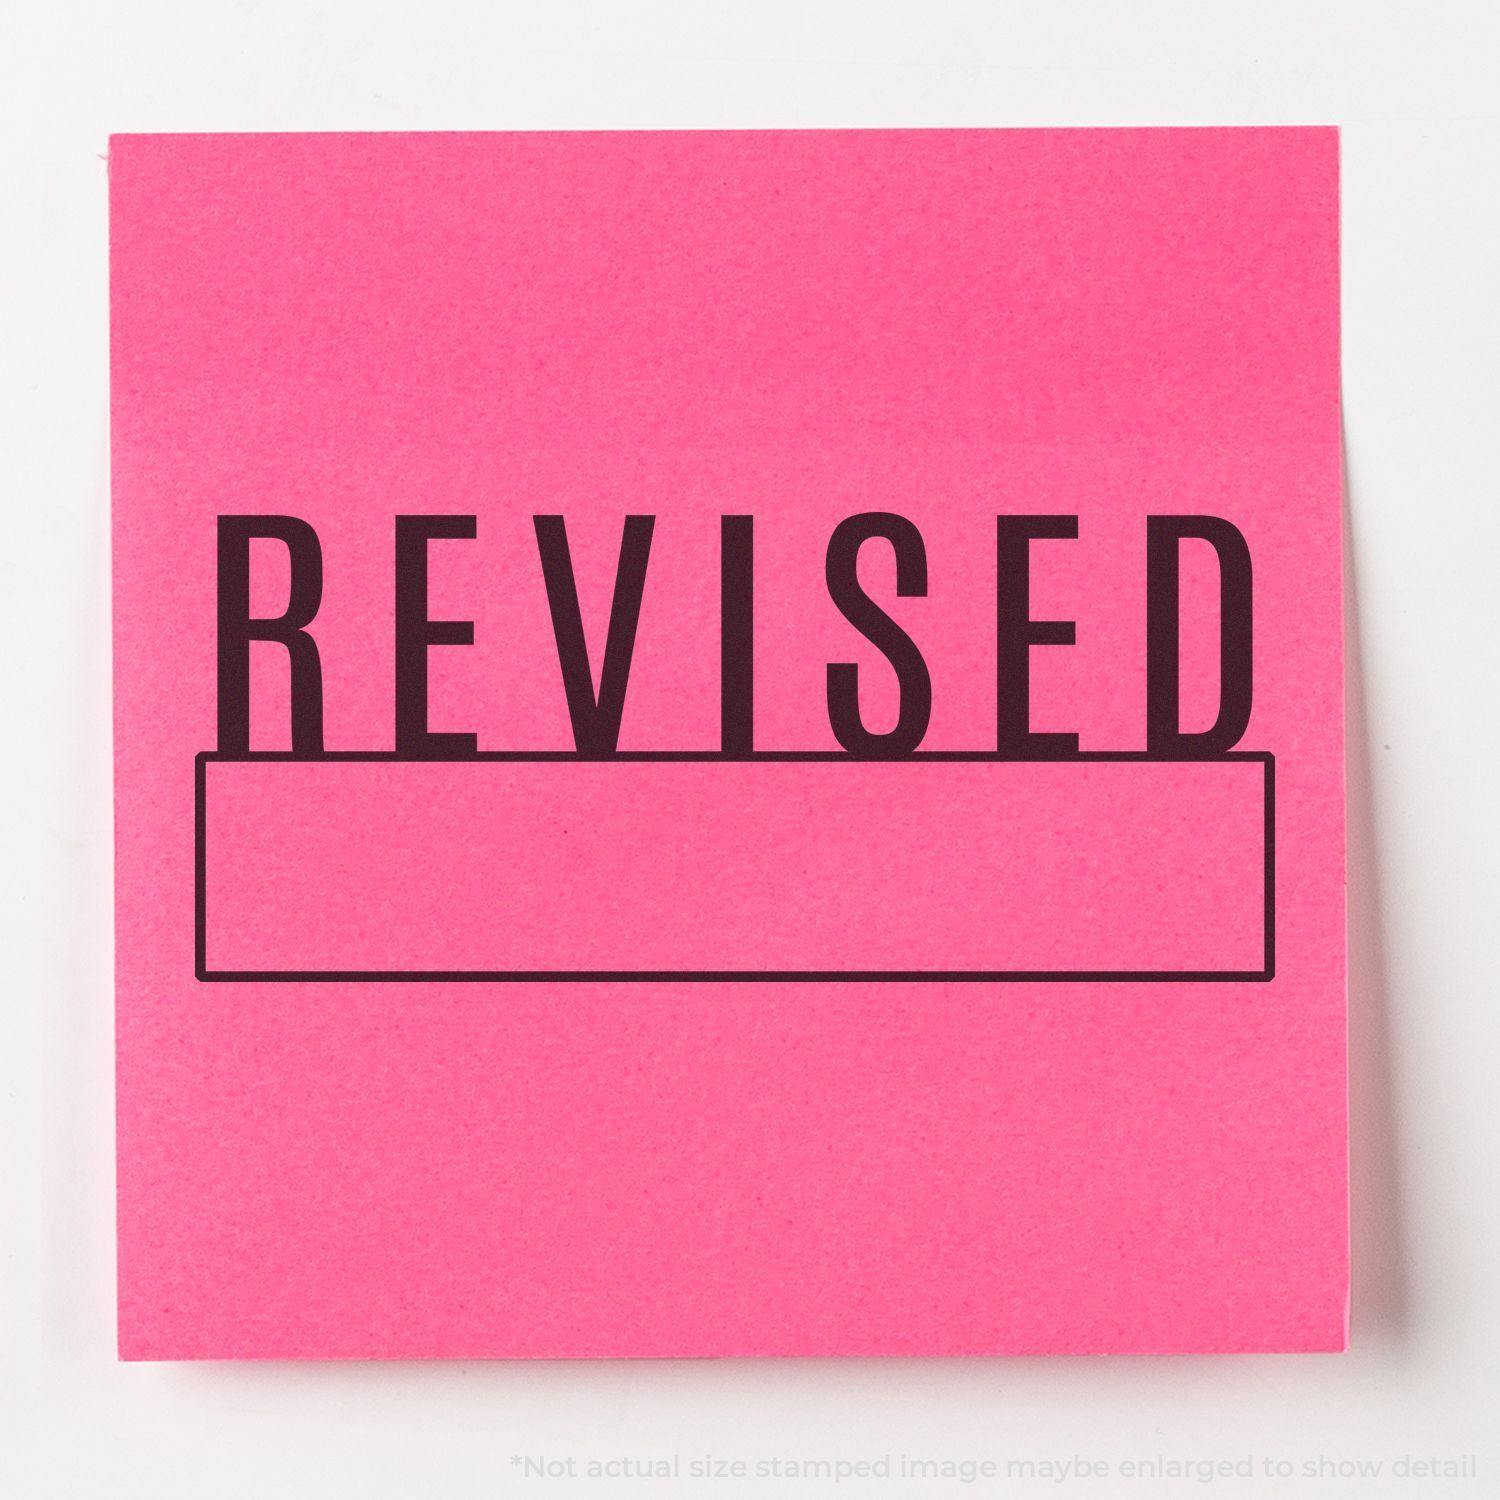 A stock office rubber stamp with a stamped image showing how the text "REVISED" in a large font with a box under the text is displayed after stamping.